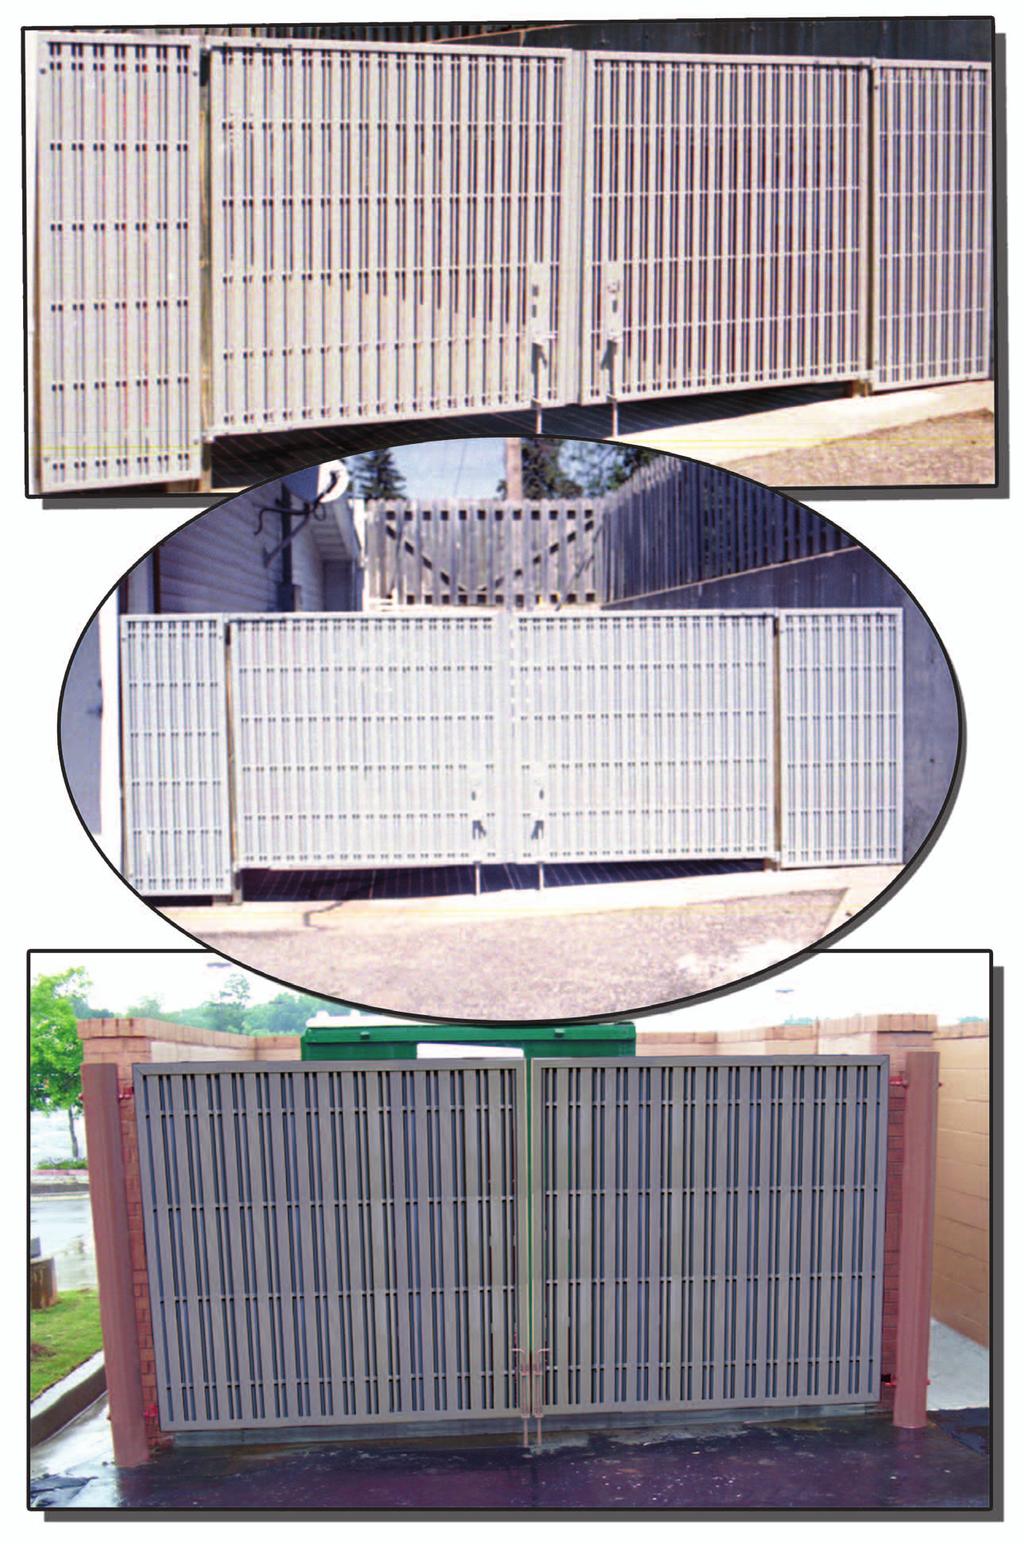 DURAGRID fiberglass trash gates and enclosures are a perfect solution to the challenge of screening waste receptacles while maintaining easy accessibility.